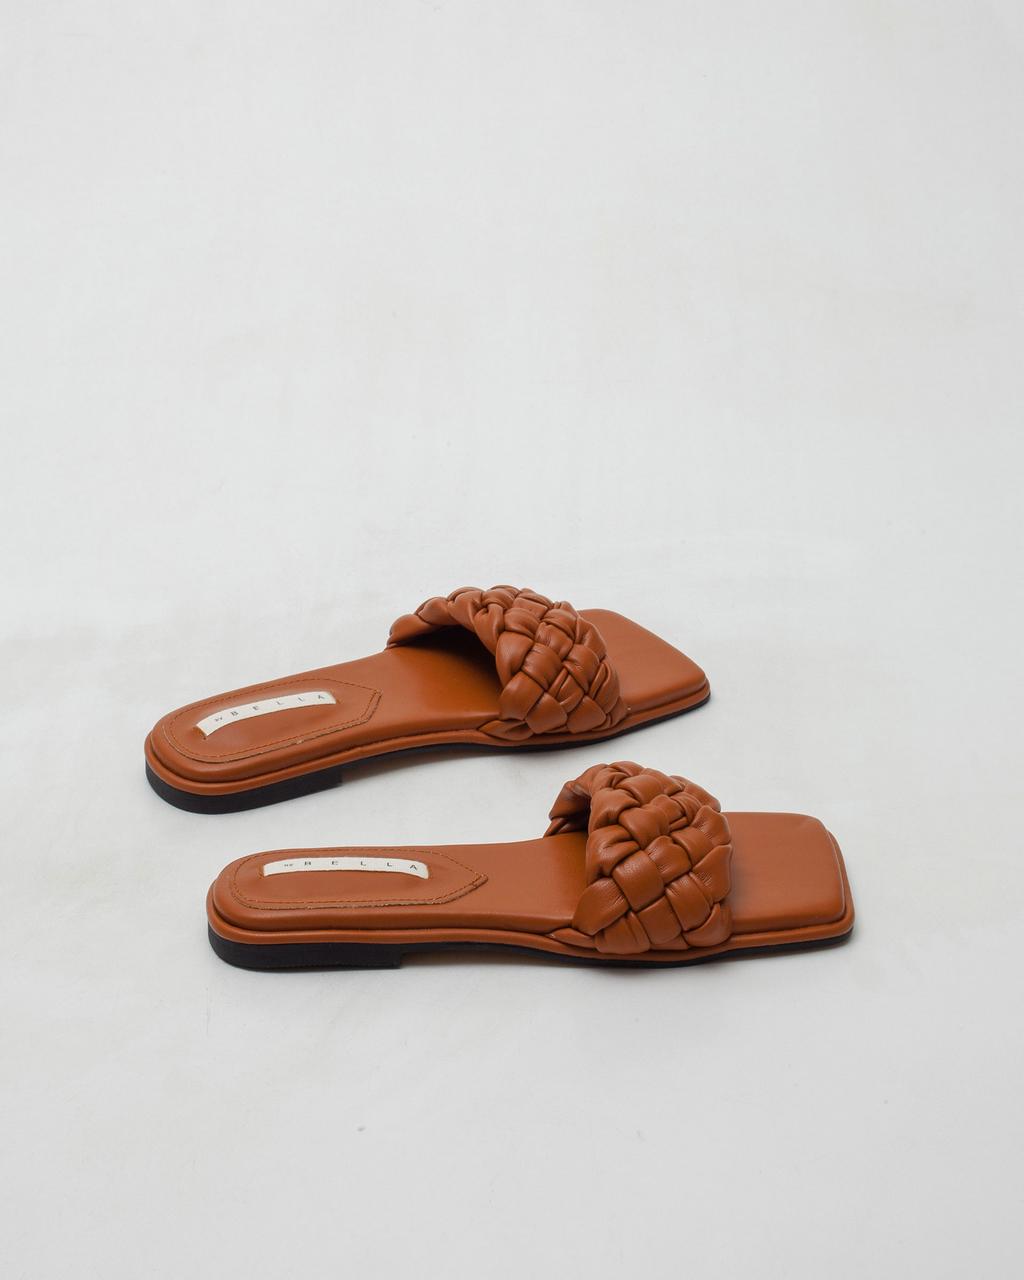 Tagtraume Relax-092 - Brown(브라운)